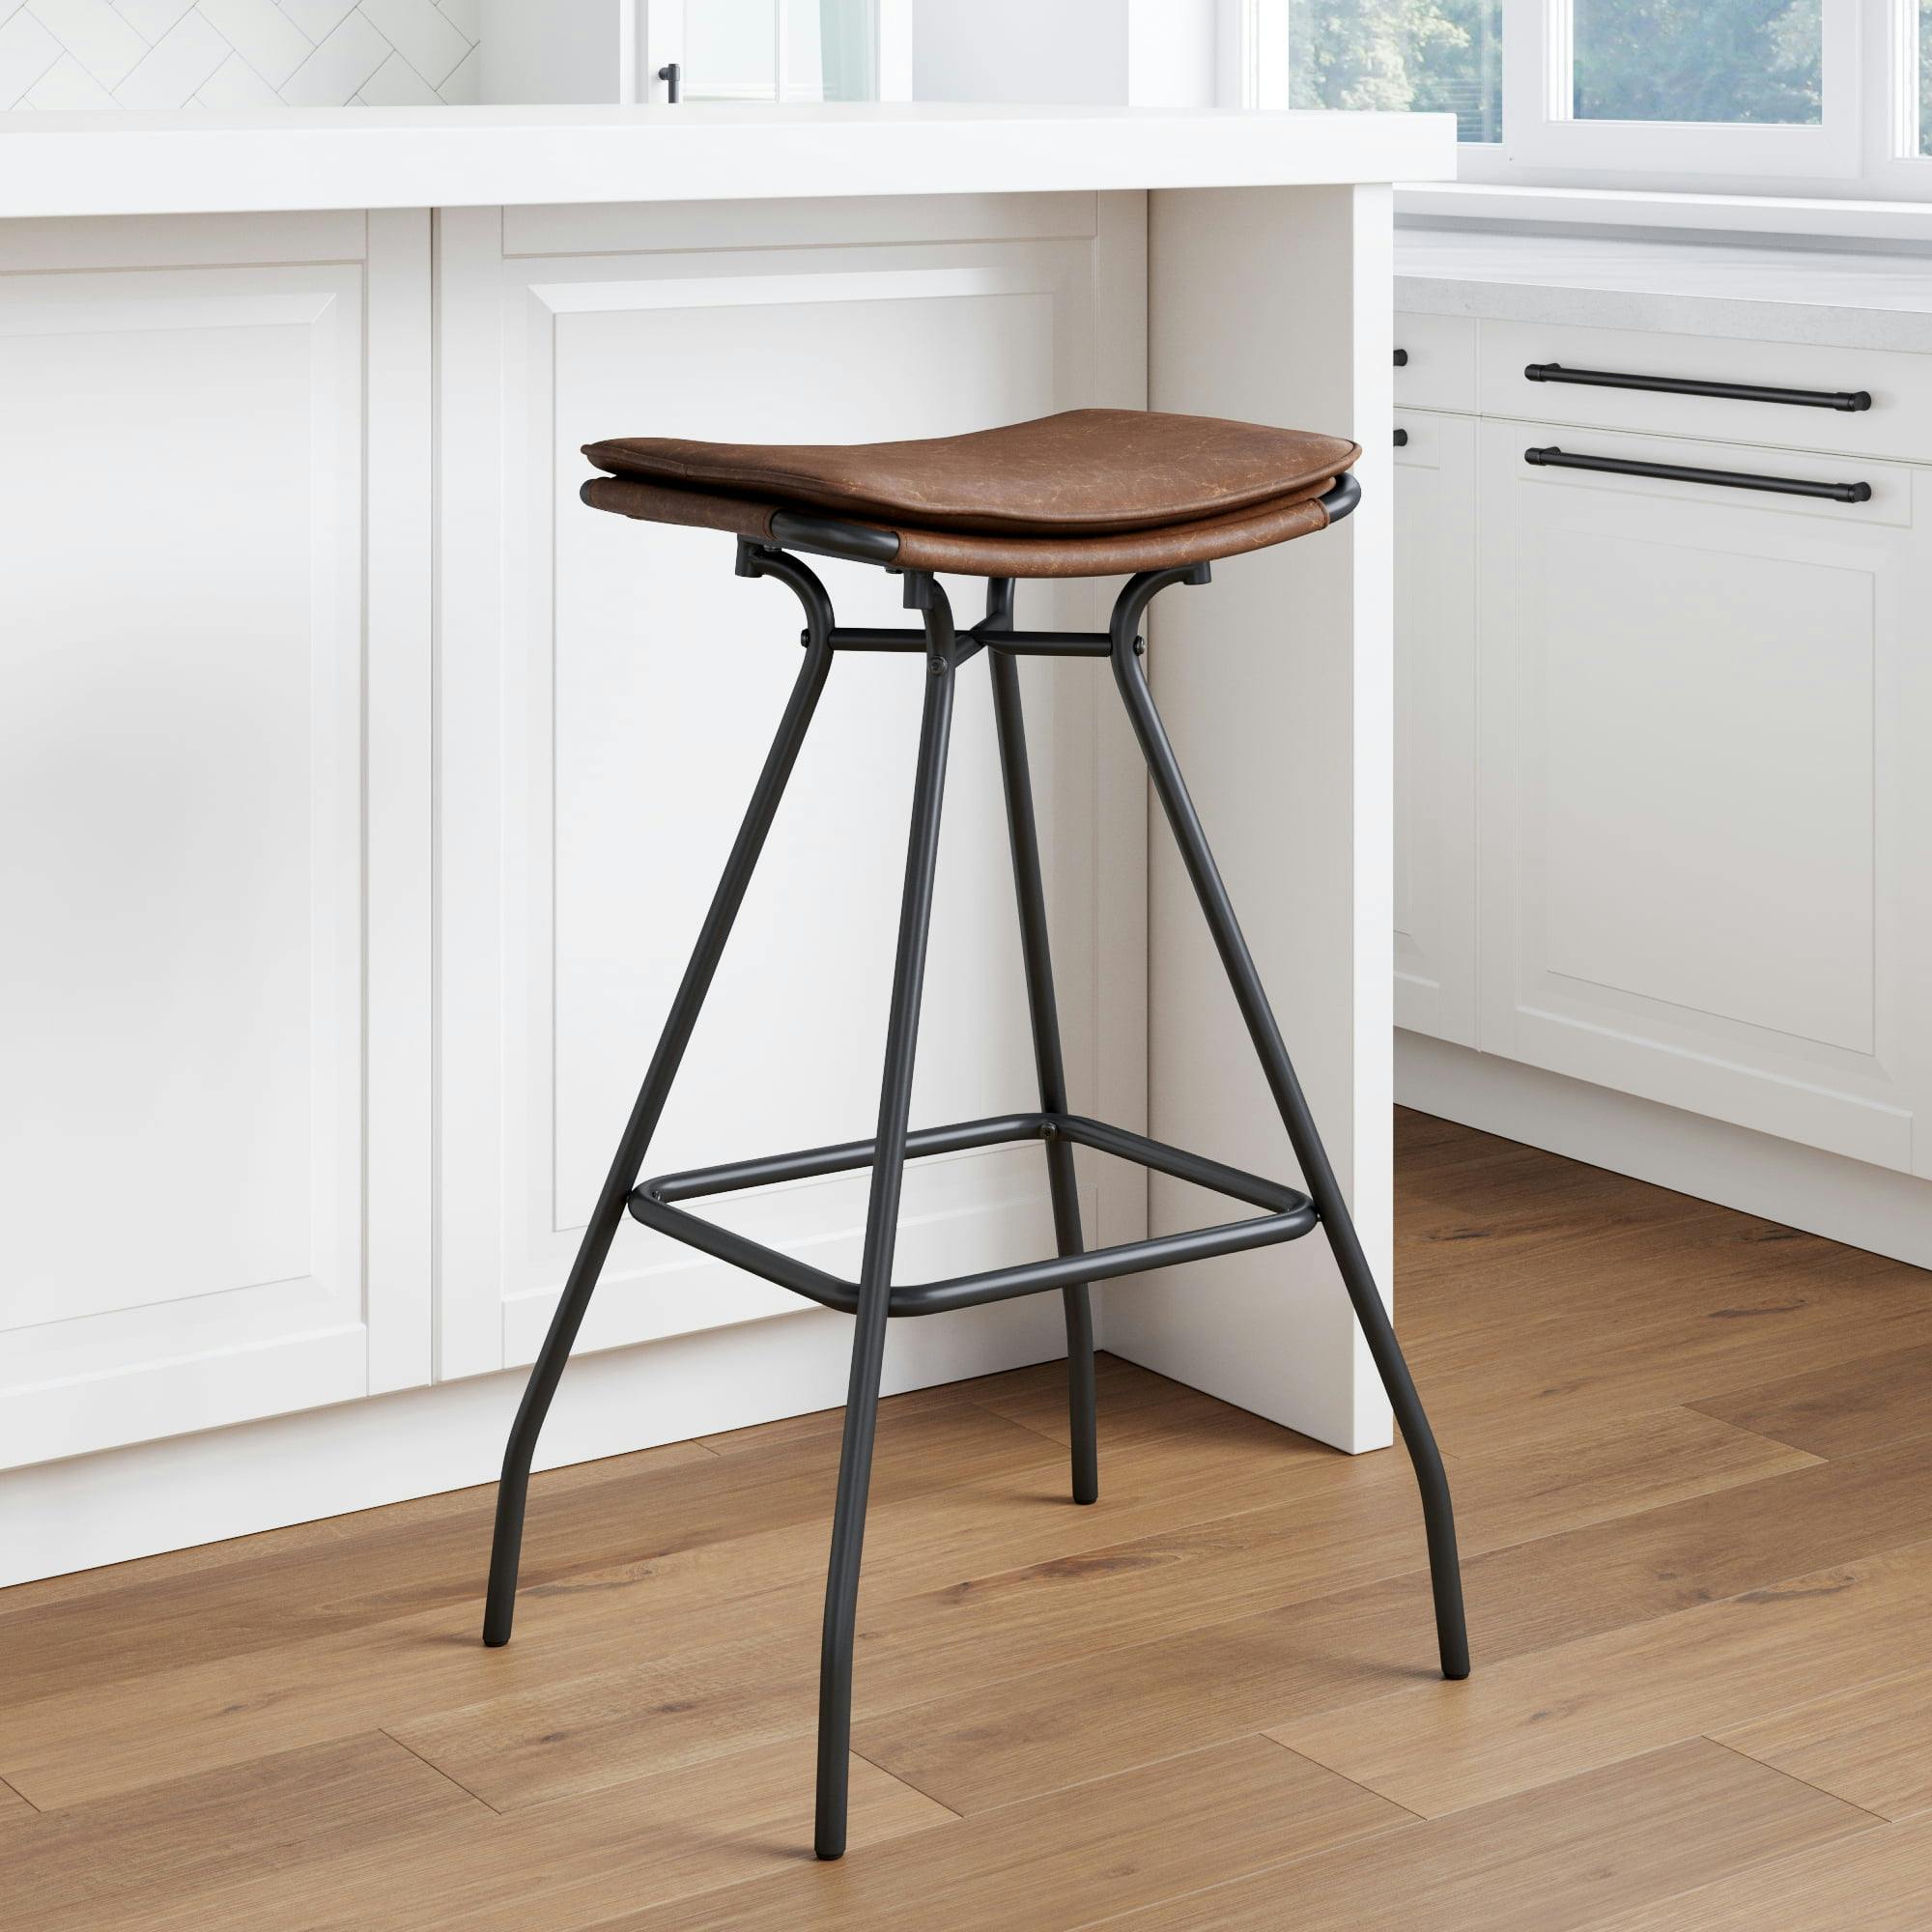 Dominique 30" Industrial Saddle Leather and Metal Bar Stool, Brown/Black